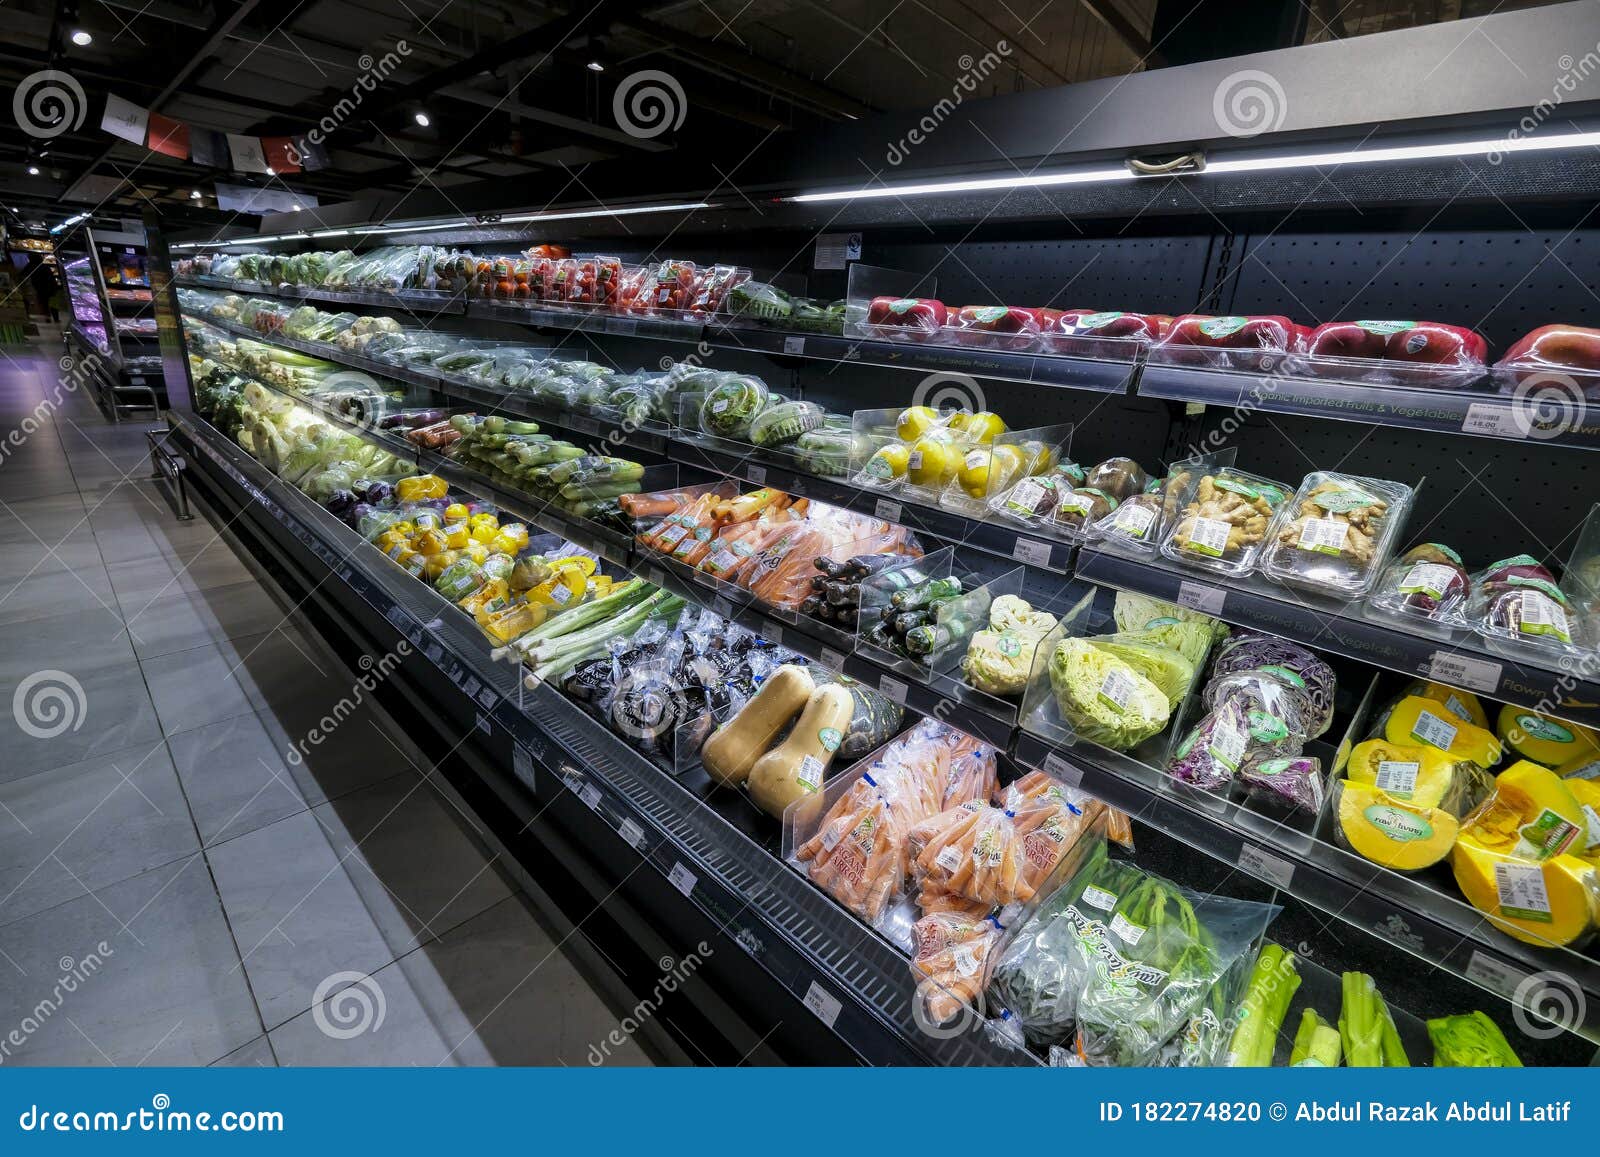 Variety Of Fresh Vegetables And Fruits On The Shelf In A Grocery Store Supermarket Editorial Image Image Of Market Display 182274820